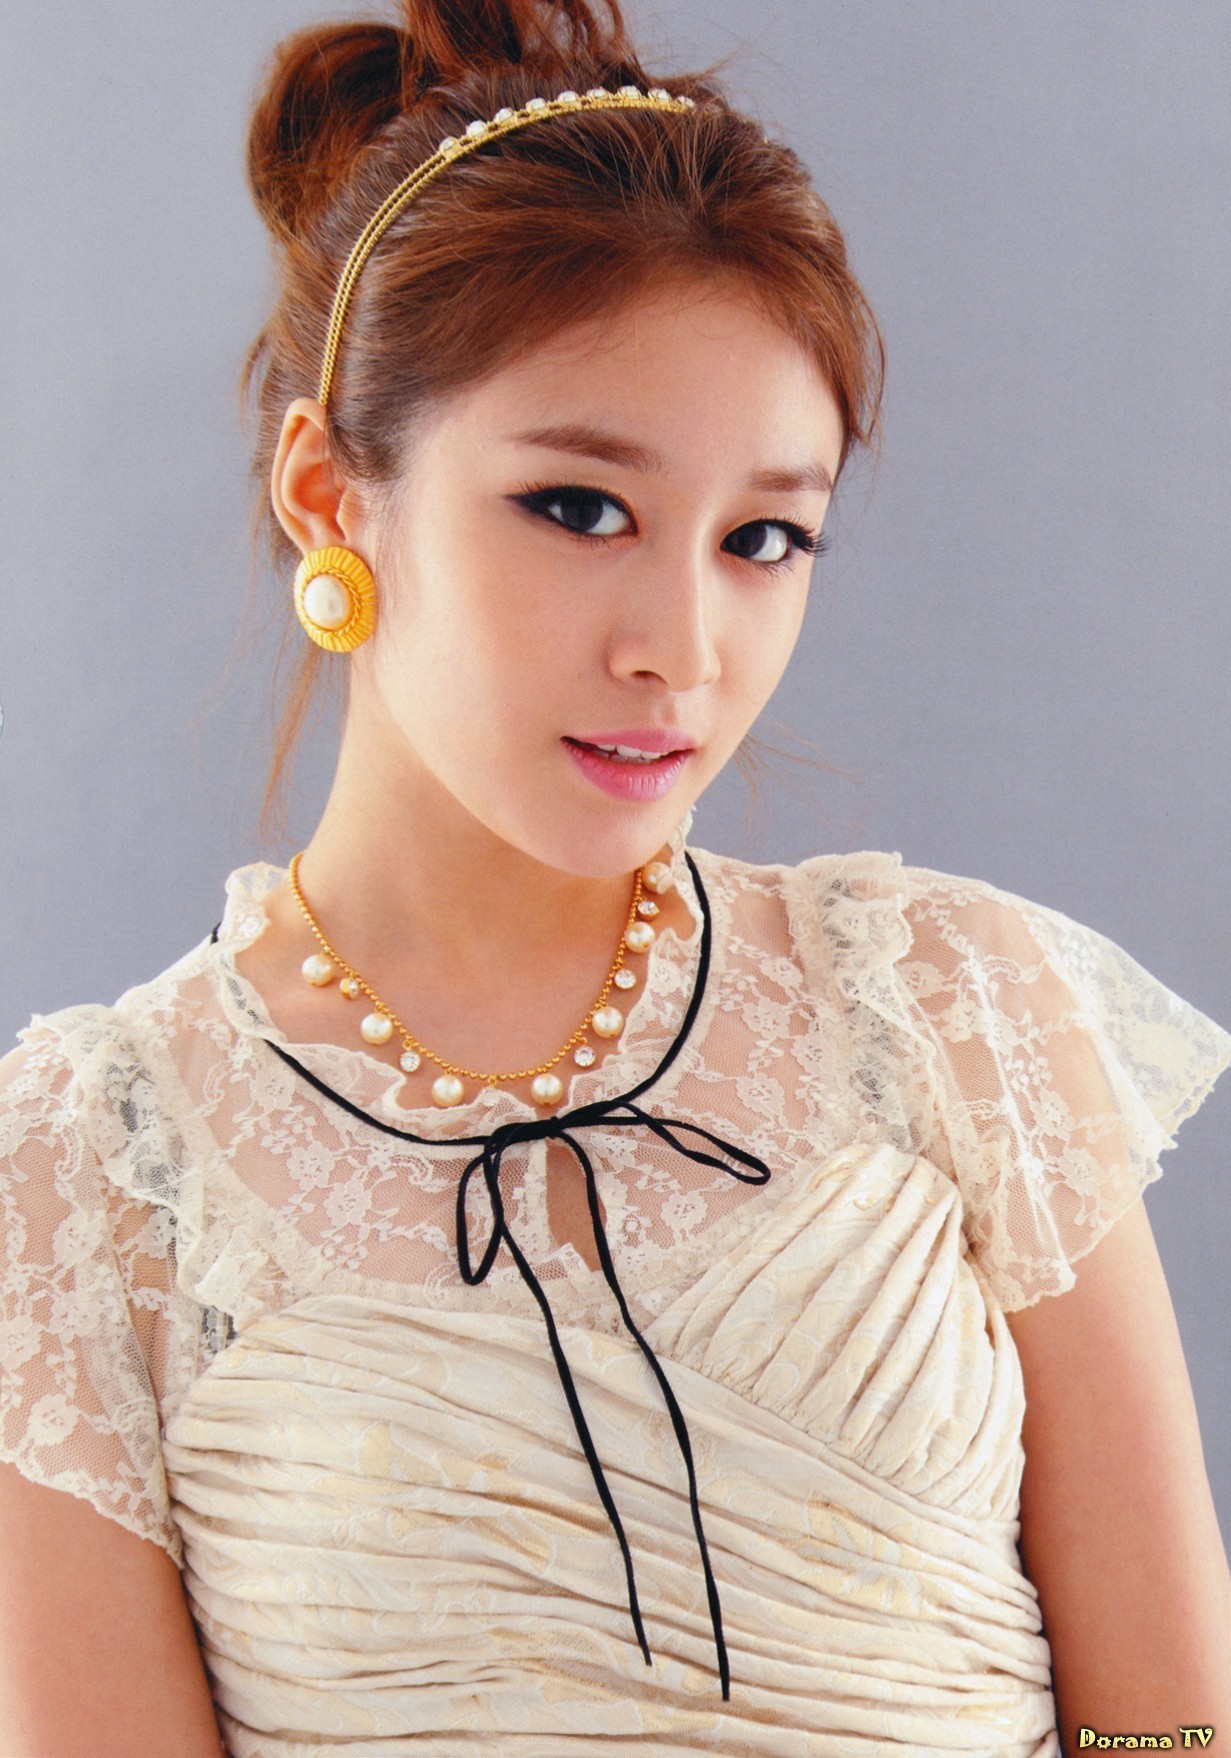 Park Ji Yeon - bio and intersting facts about personal life.